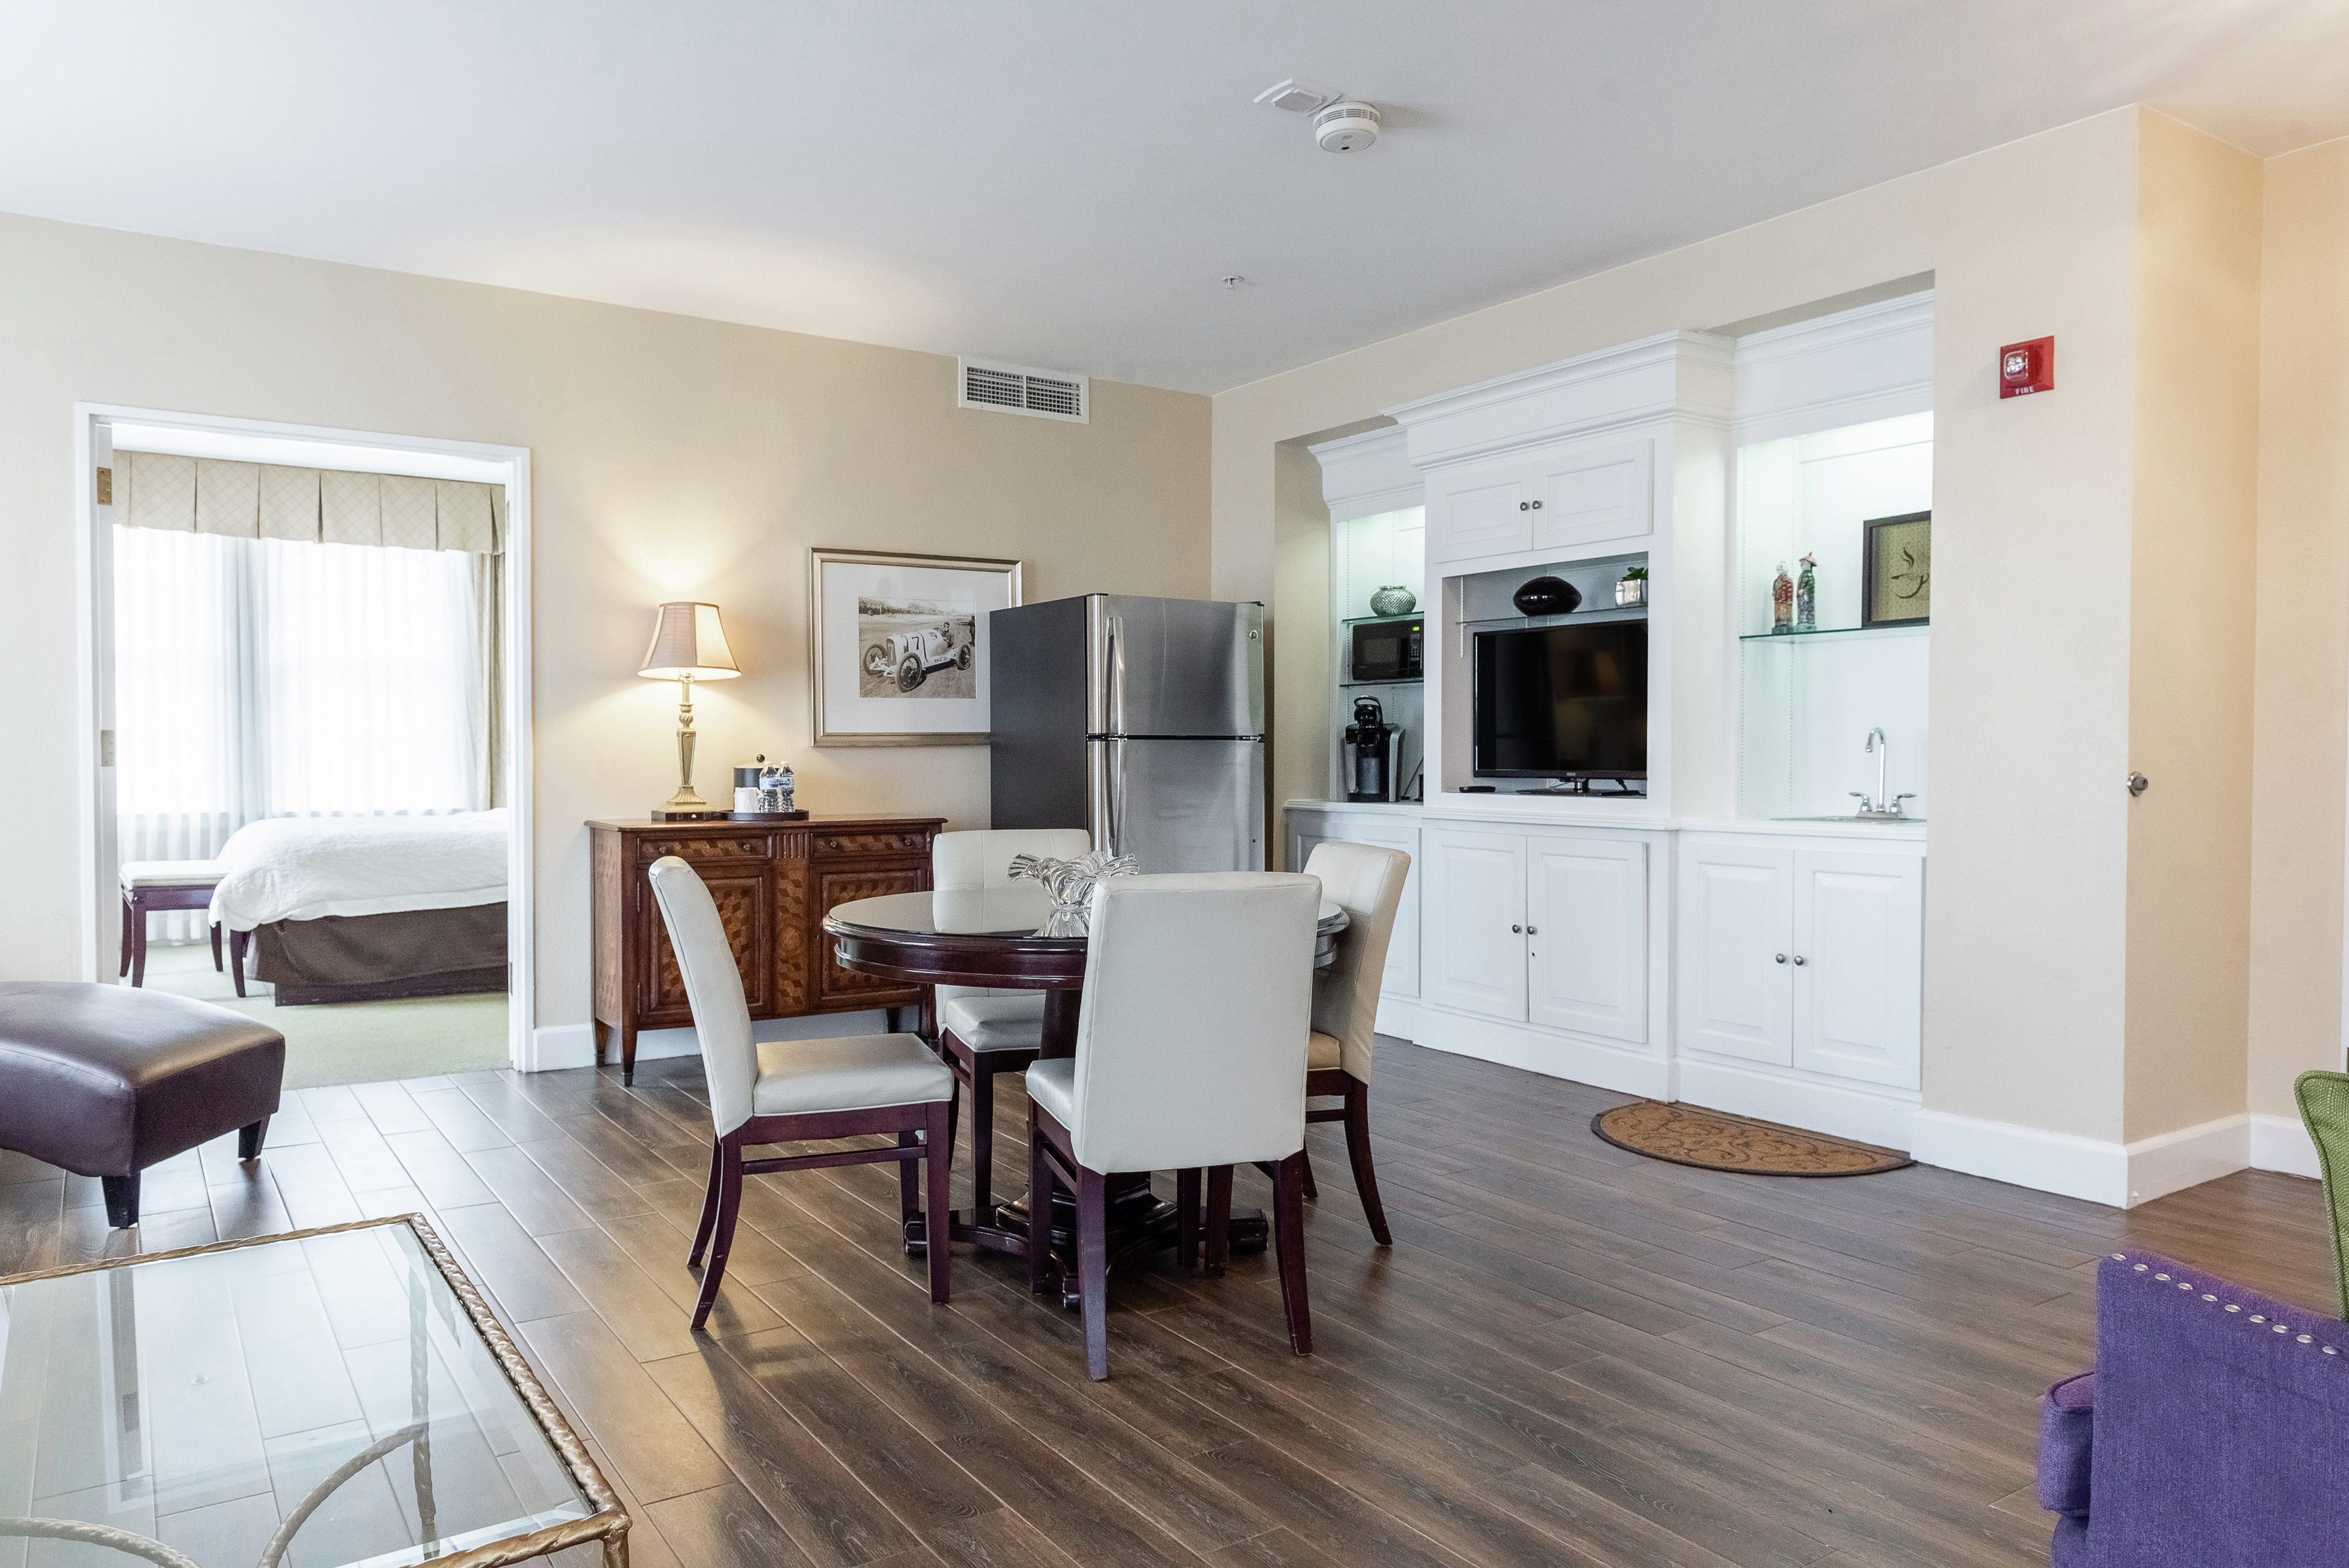 Two King Two Bedroom Suite with Bed, Dining Area, Kitchenette, and Room Technology